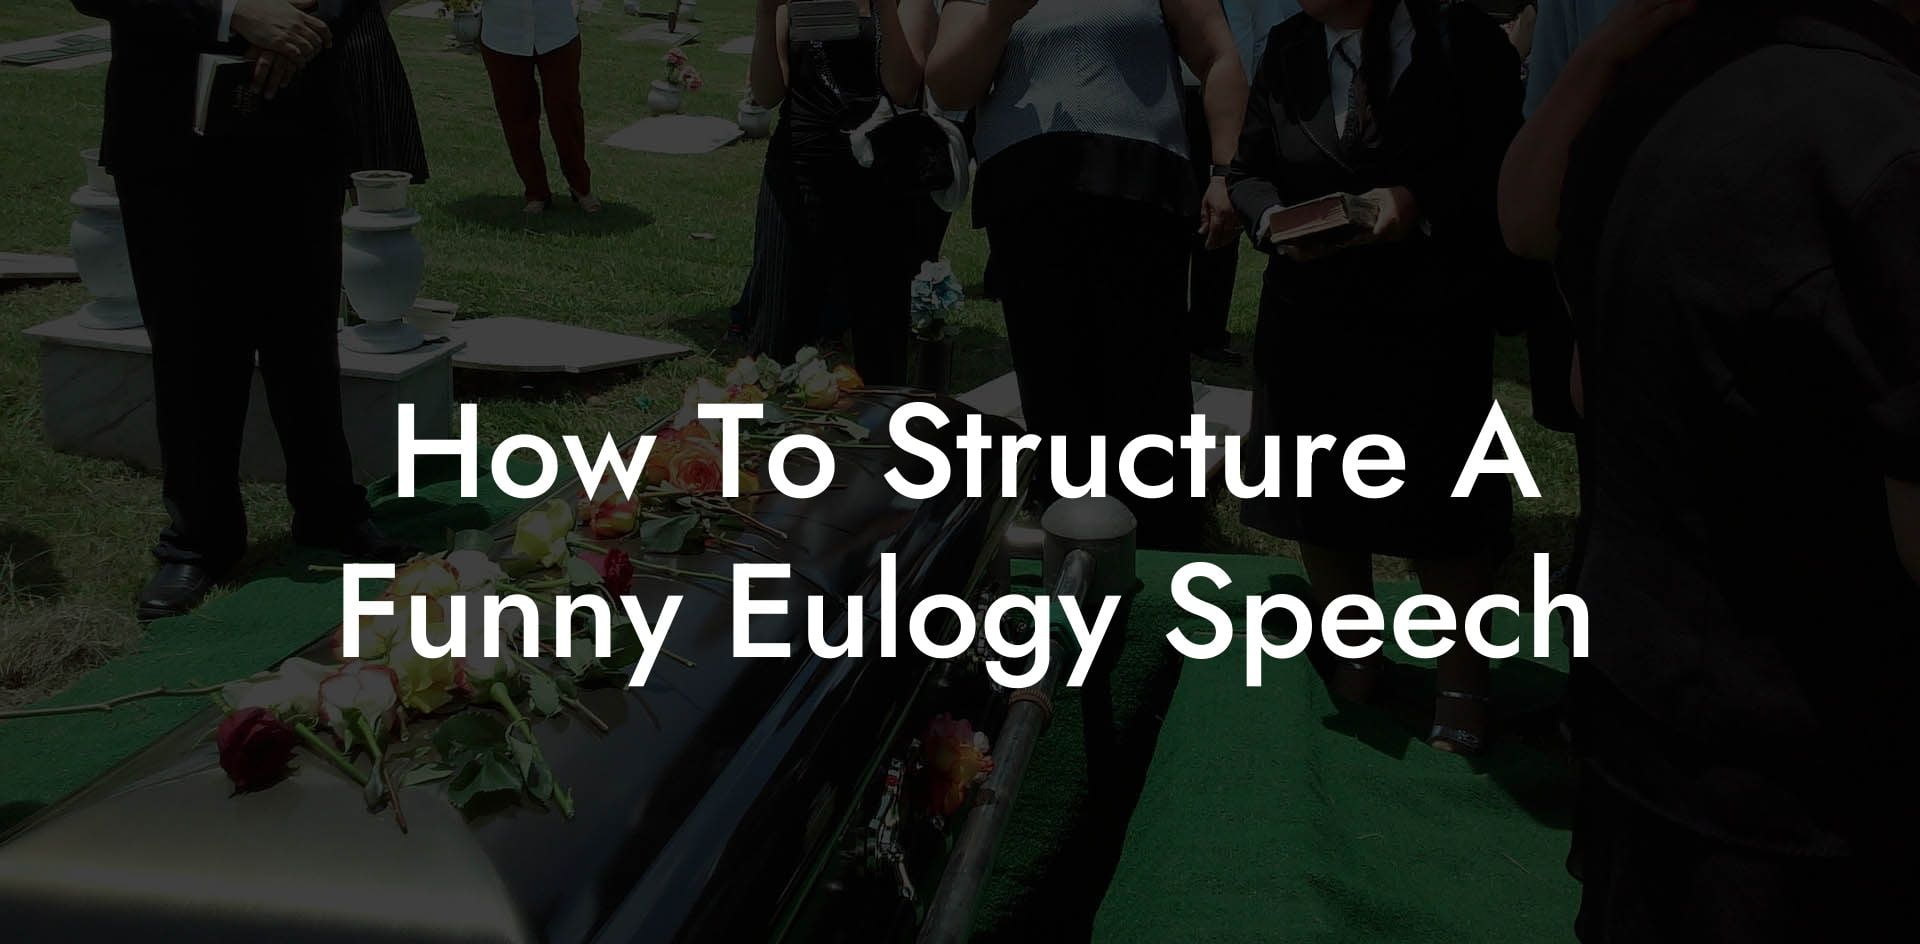 How To Structure A Funny Eulogy Speech